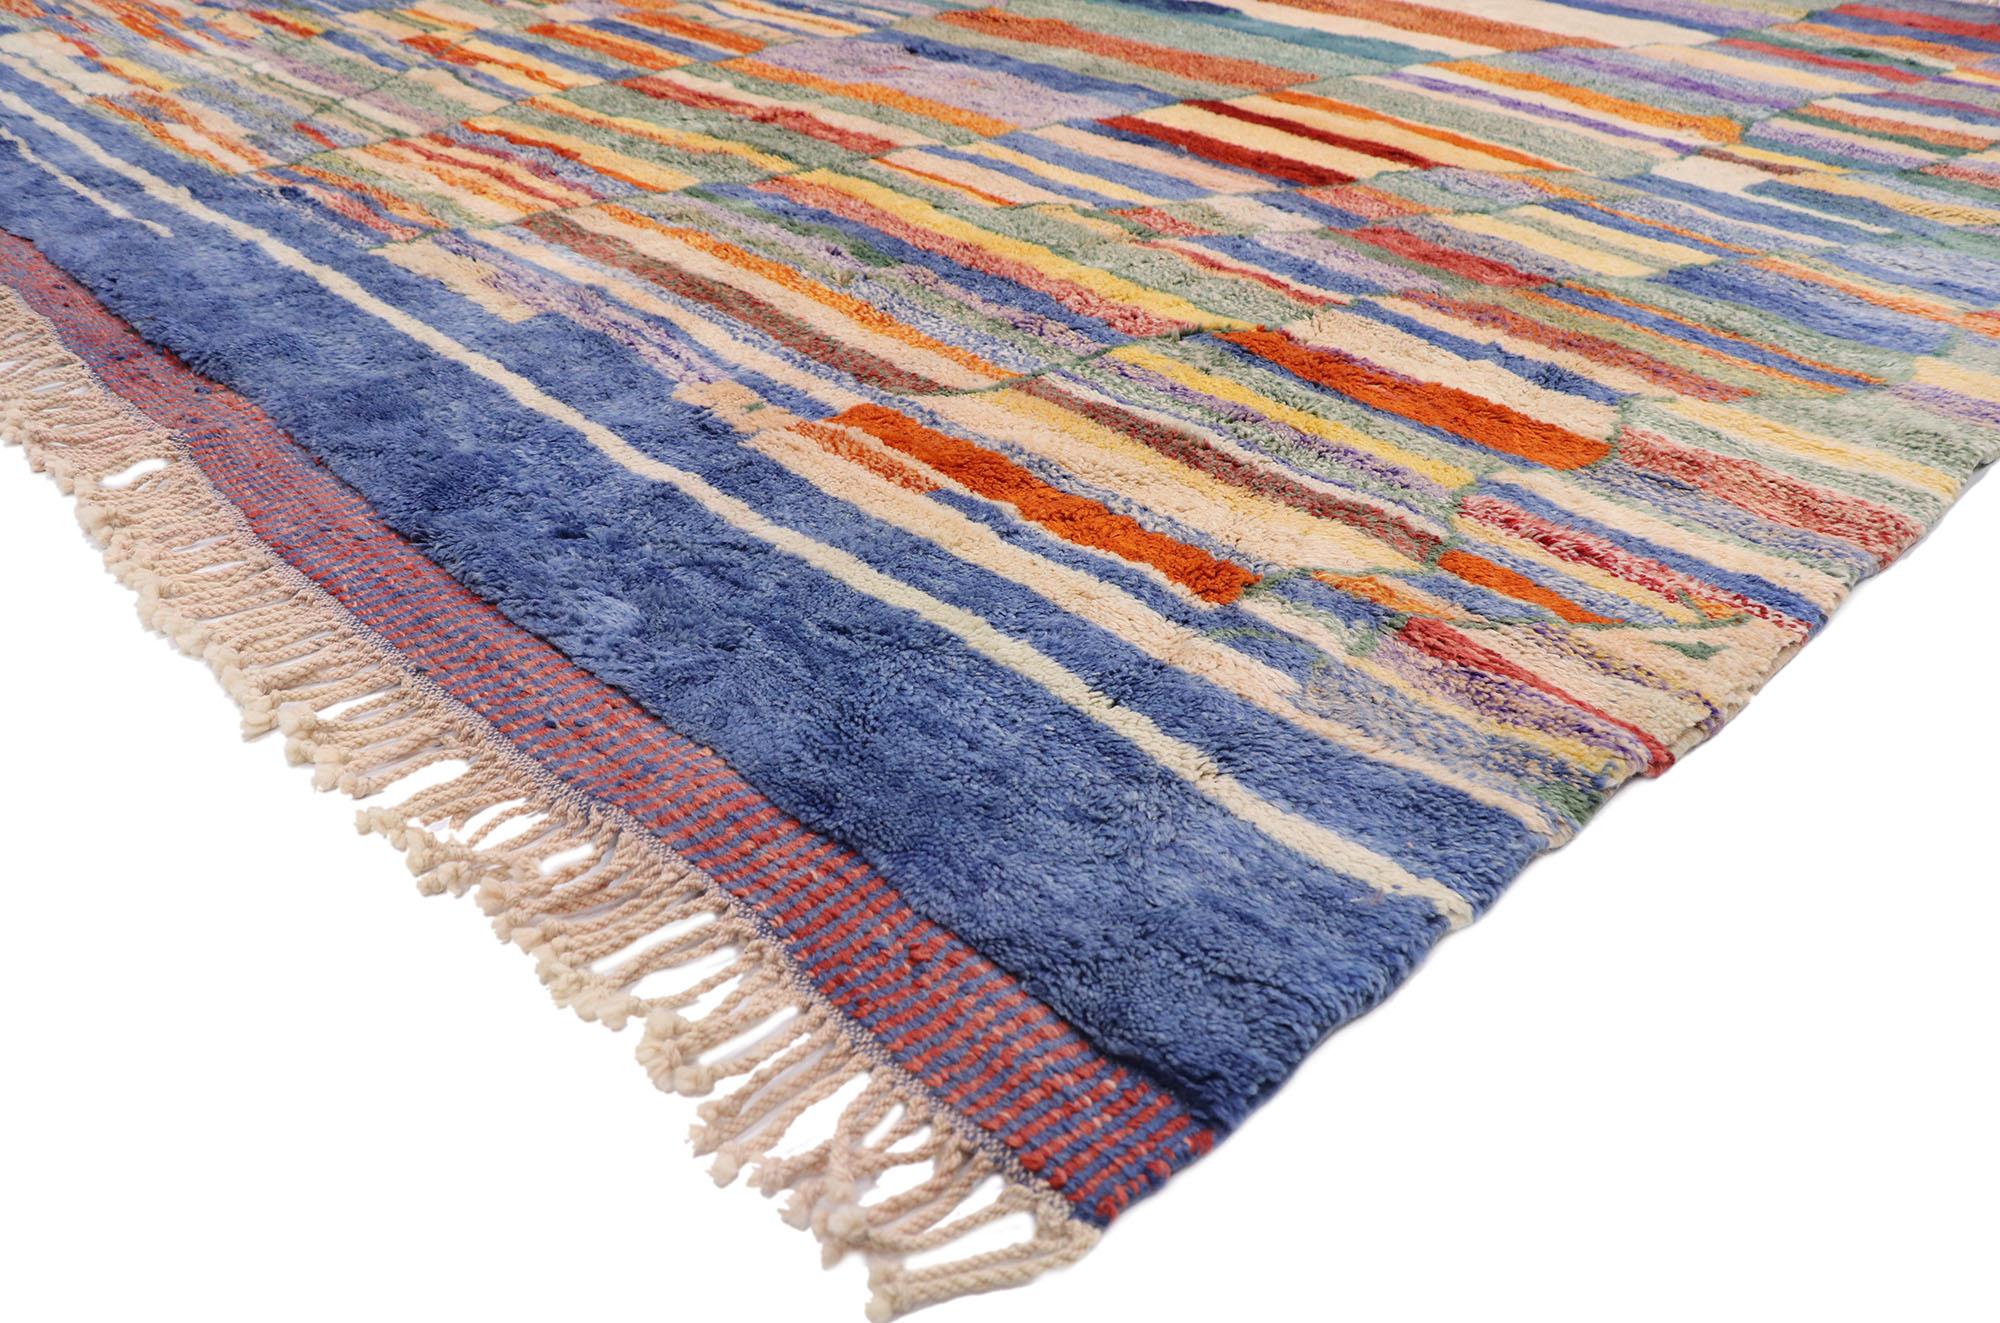 21165 Modern Beni Mrirt Moroccan Rug, 10'04 x 12'11. Beni Mrirt rugs are a type of traditional Moroccan rug known for their plush texture, geometric patterns, and soft, natural color palette. They are handwoven by the Beni Mrirt tribe, which resides